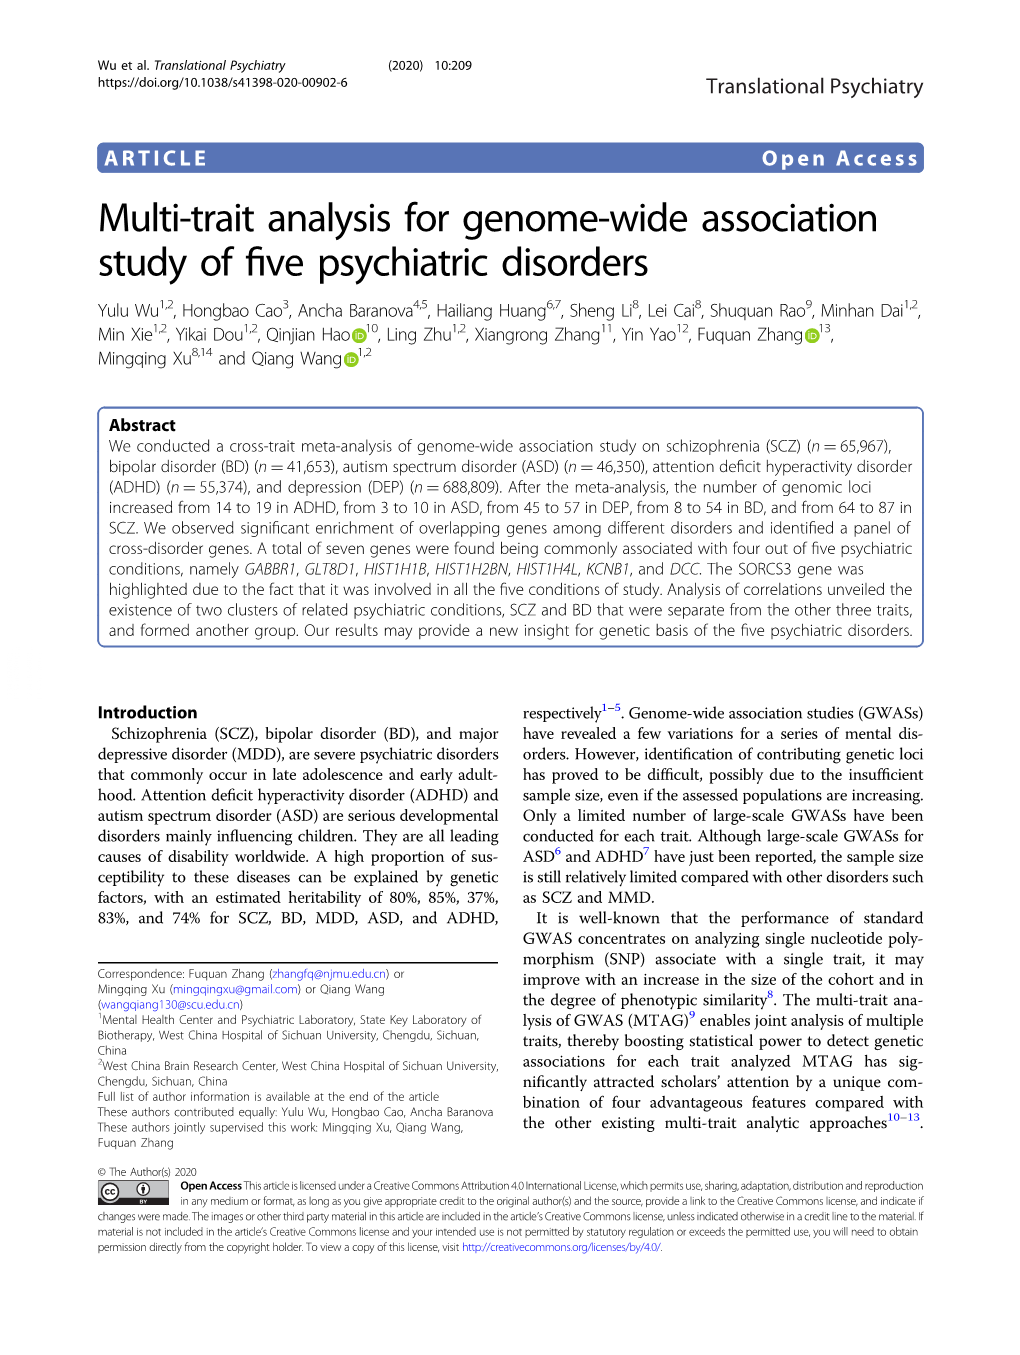 Multi-Trait Analysis for Genome-Wide Association Study of Five Psychiatric